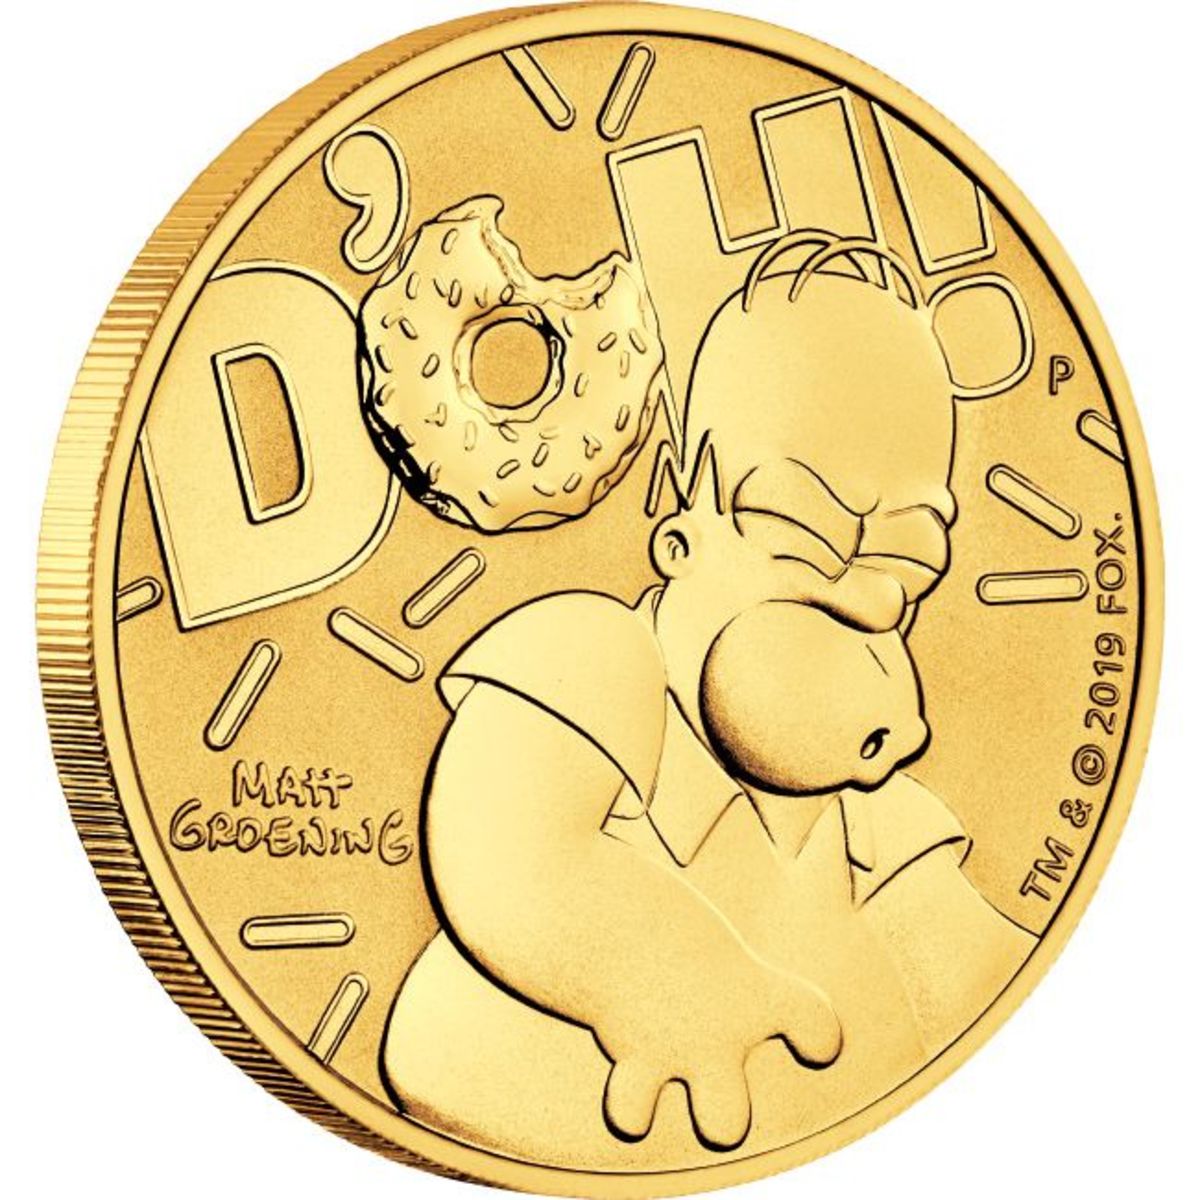 Image courtesy of the Perth Mint. THE SIMPSONS TM & © 2019 Twentieth Century Fox Film Corporation. All Rights Reserved.